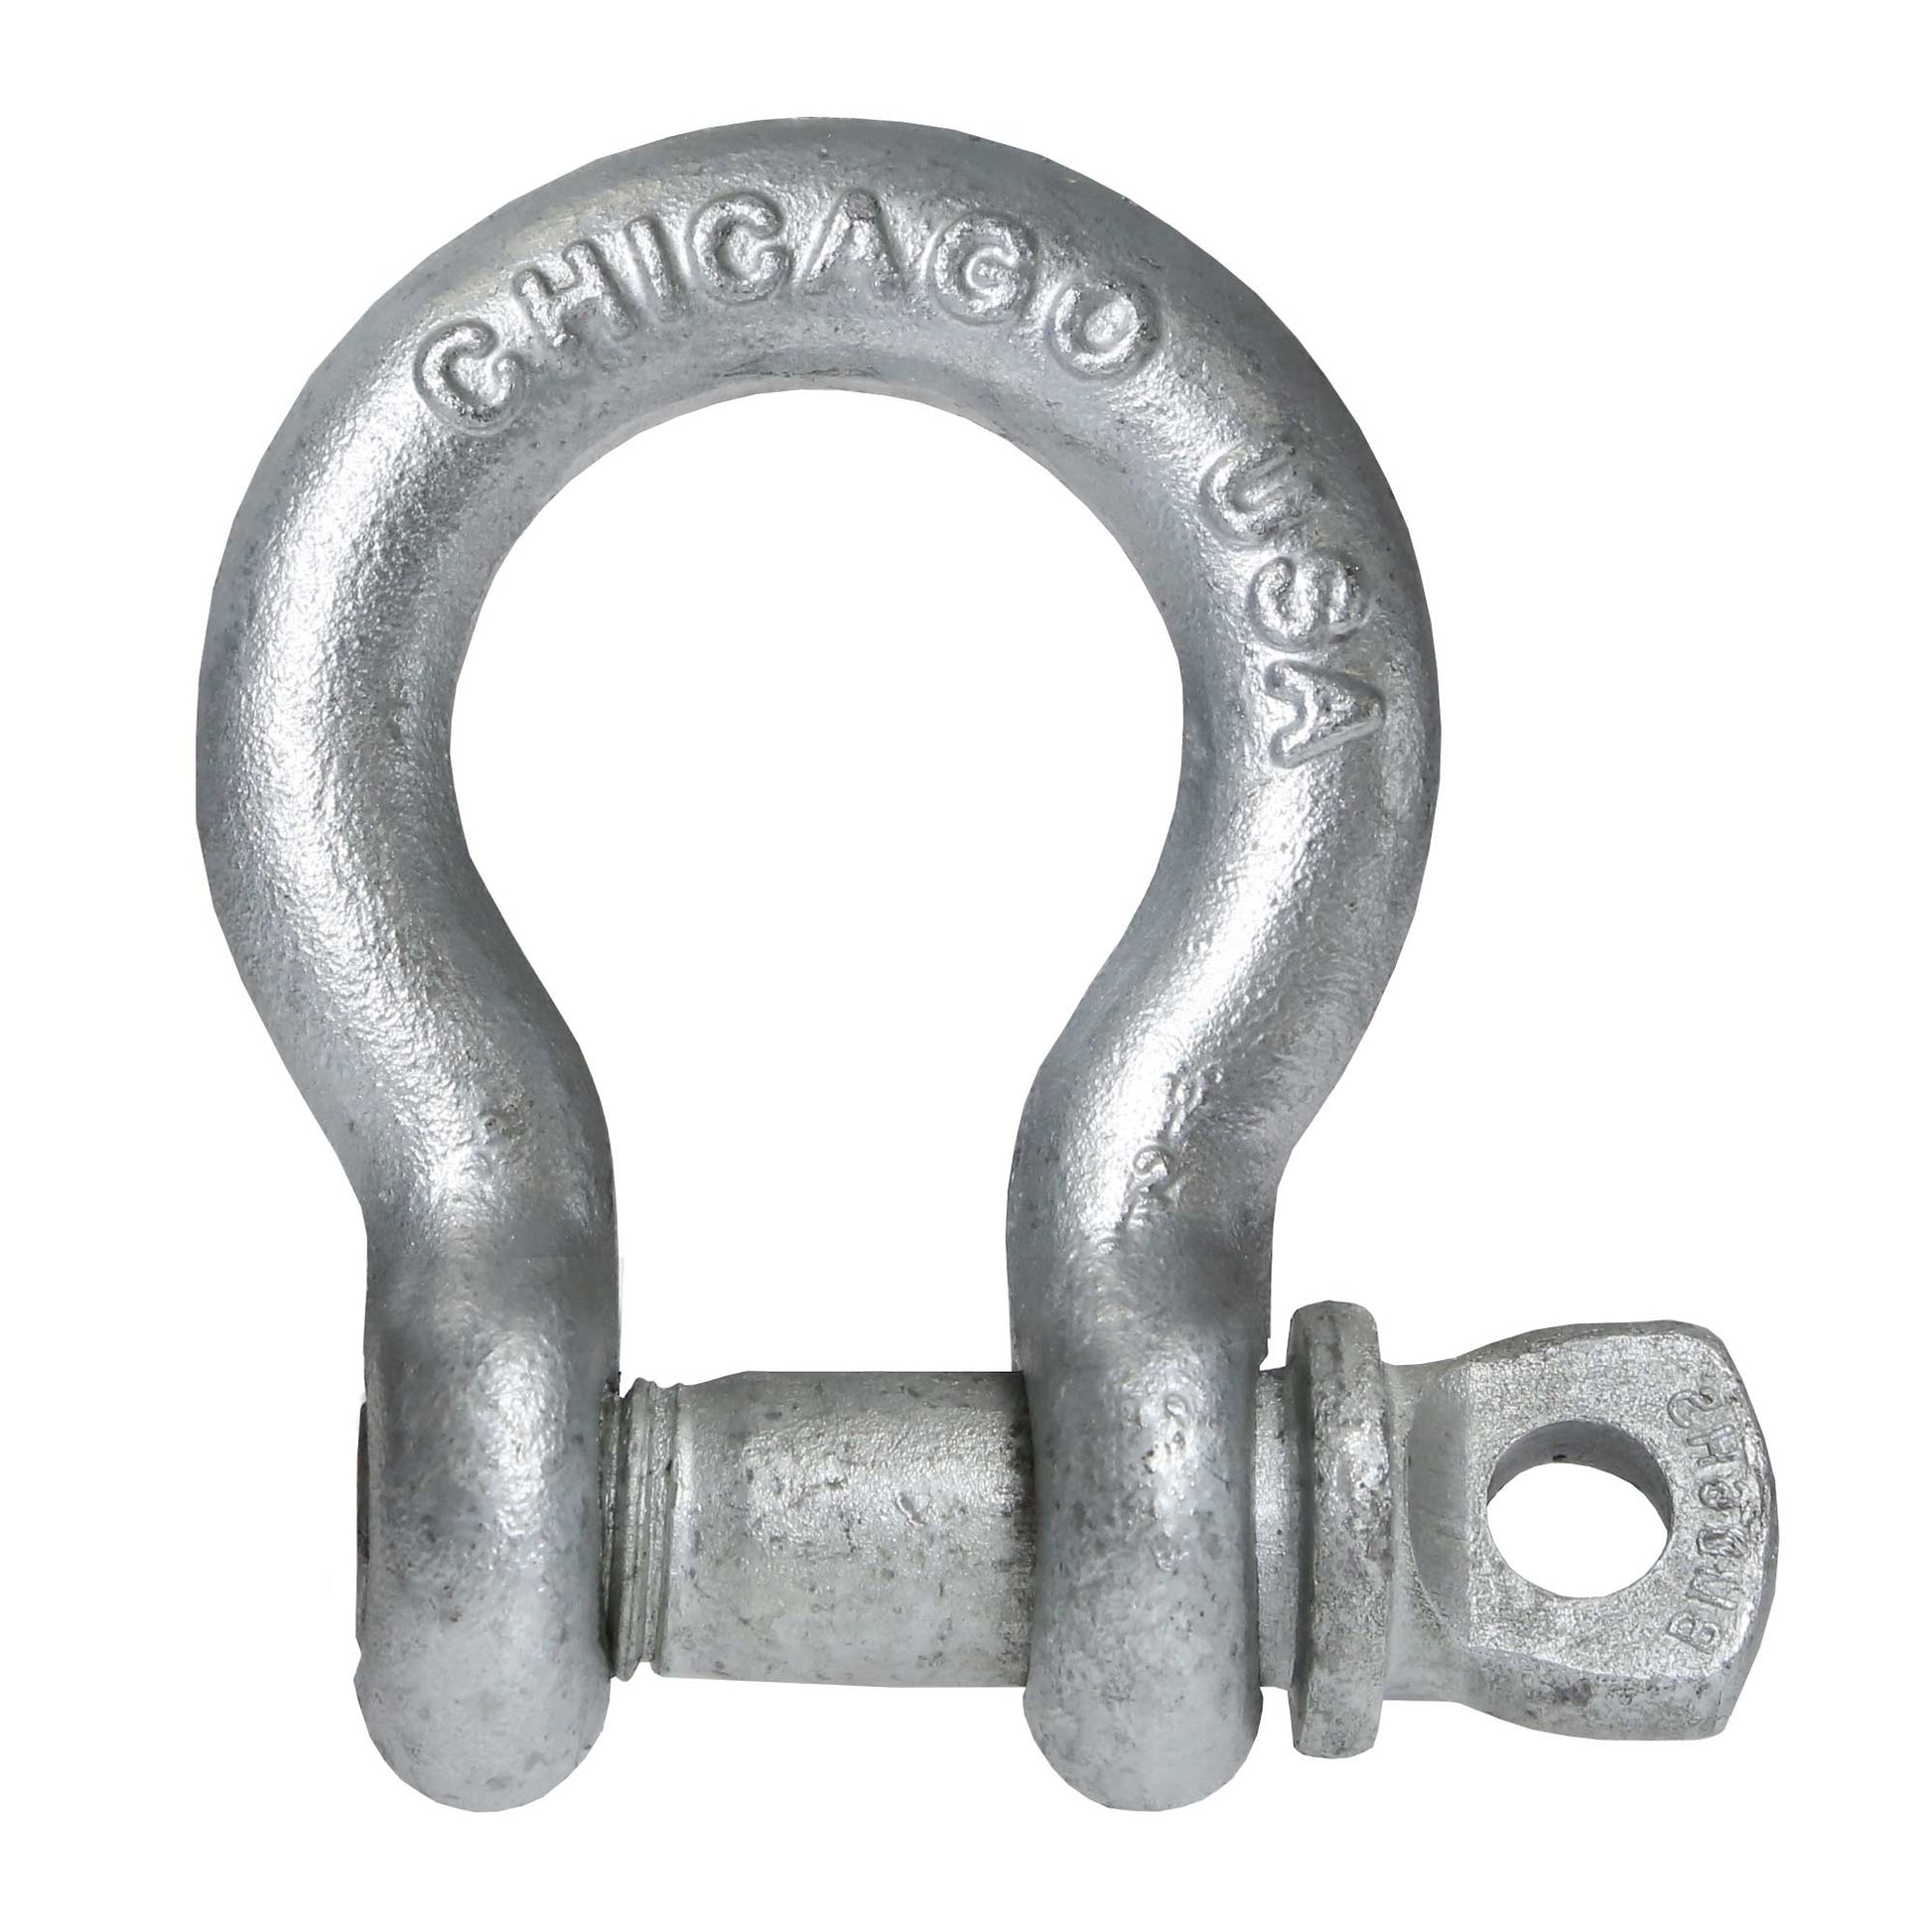 Screw Pin Anchor Shackle - Chicago Hardware - 1-1/4" Galvanized Steel - 12 Ton primary image